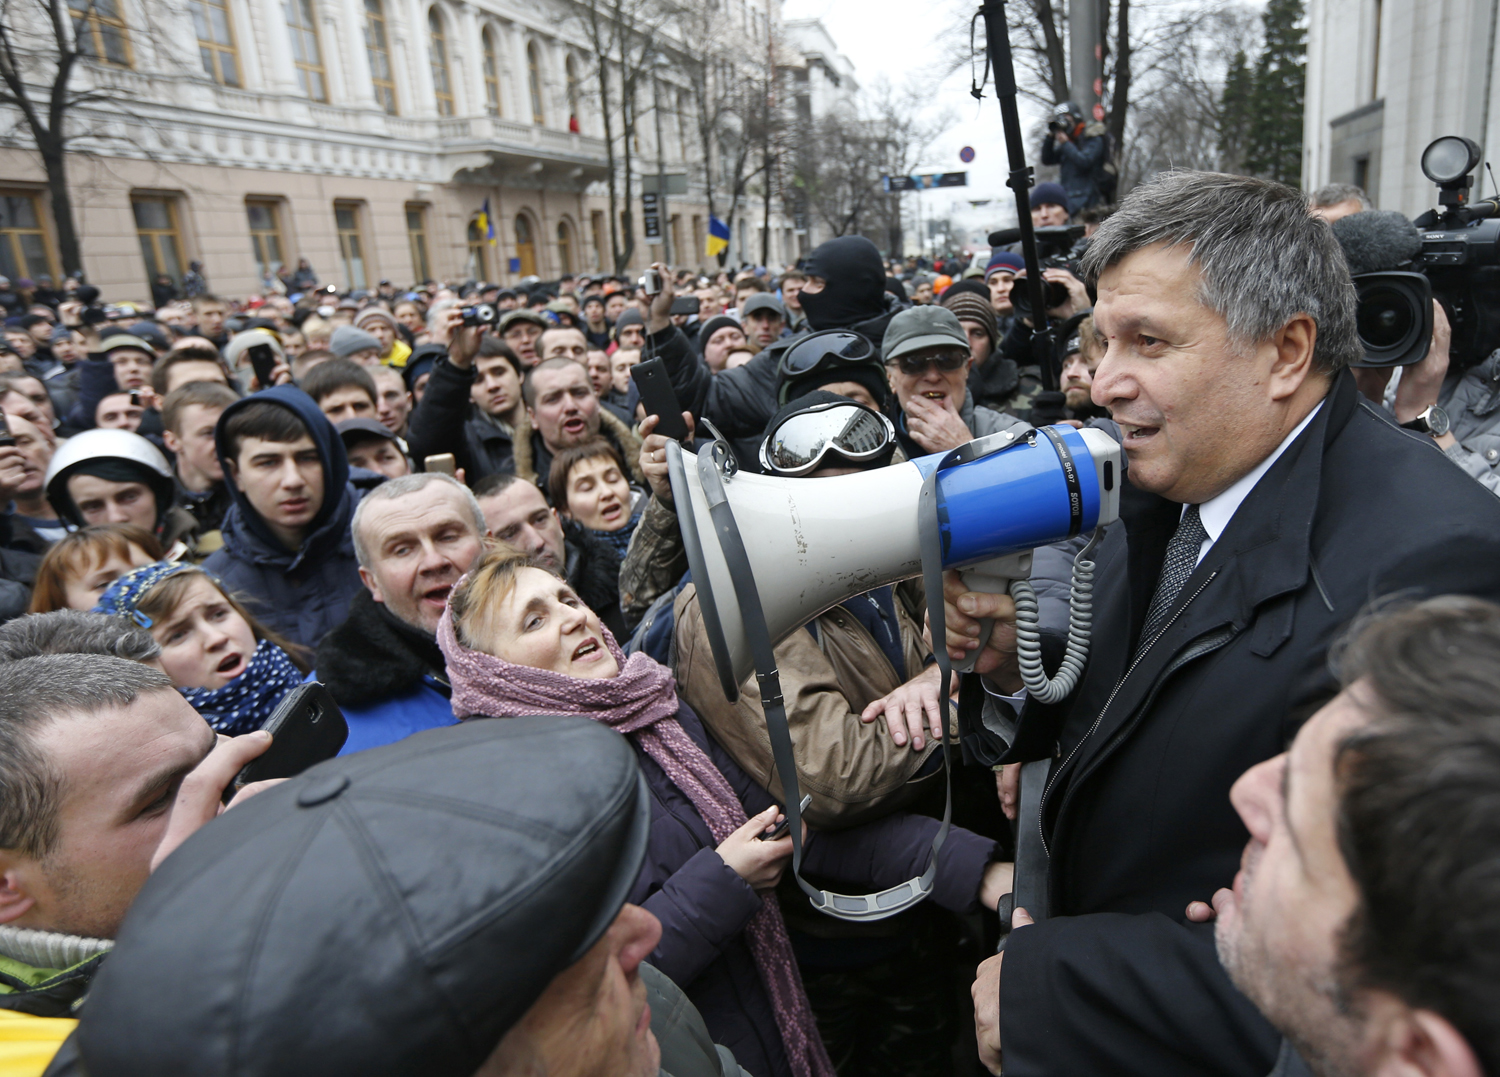 Newly elected Ukrainian interior minister Arsen Avakov (R) holds a loud-speaker as he addresses anti-government protesters outside the Ukrainian parliament building in Kiev February 22, 2014. (Vasily Fedosenko—Reuters)